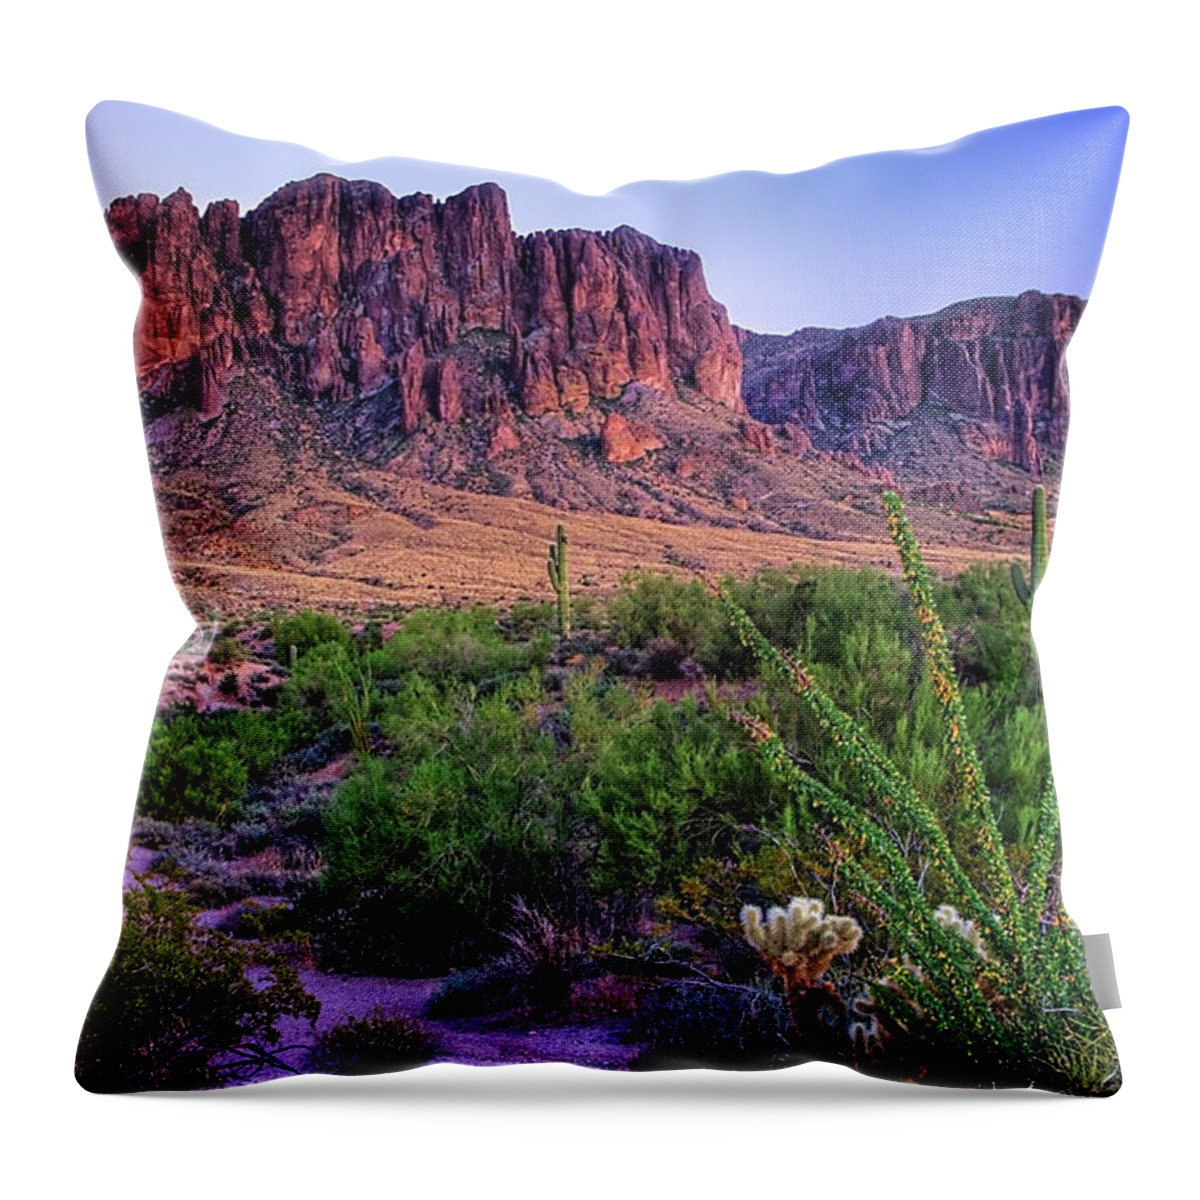 Tranquility Throw Pillow featuring the photograph Desert Trail by Patti Sullivan Schmidt